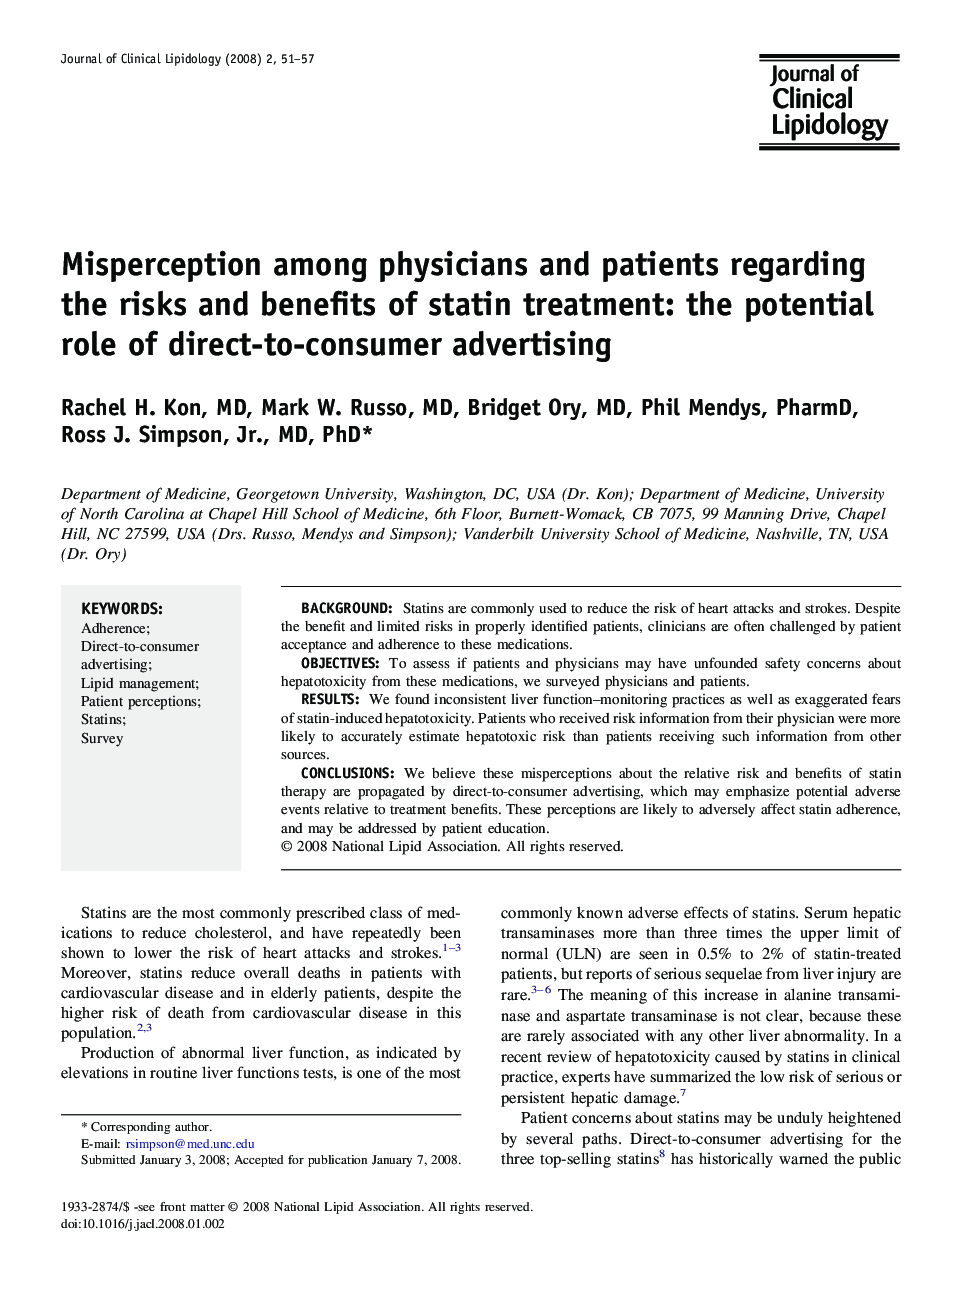 Misperception among physicians and patients regarding the risks and benefits of statin treatment: the potential role of direct-to-consumer advertising